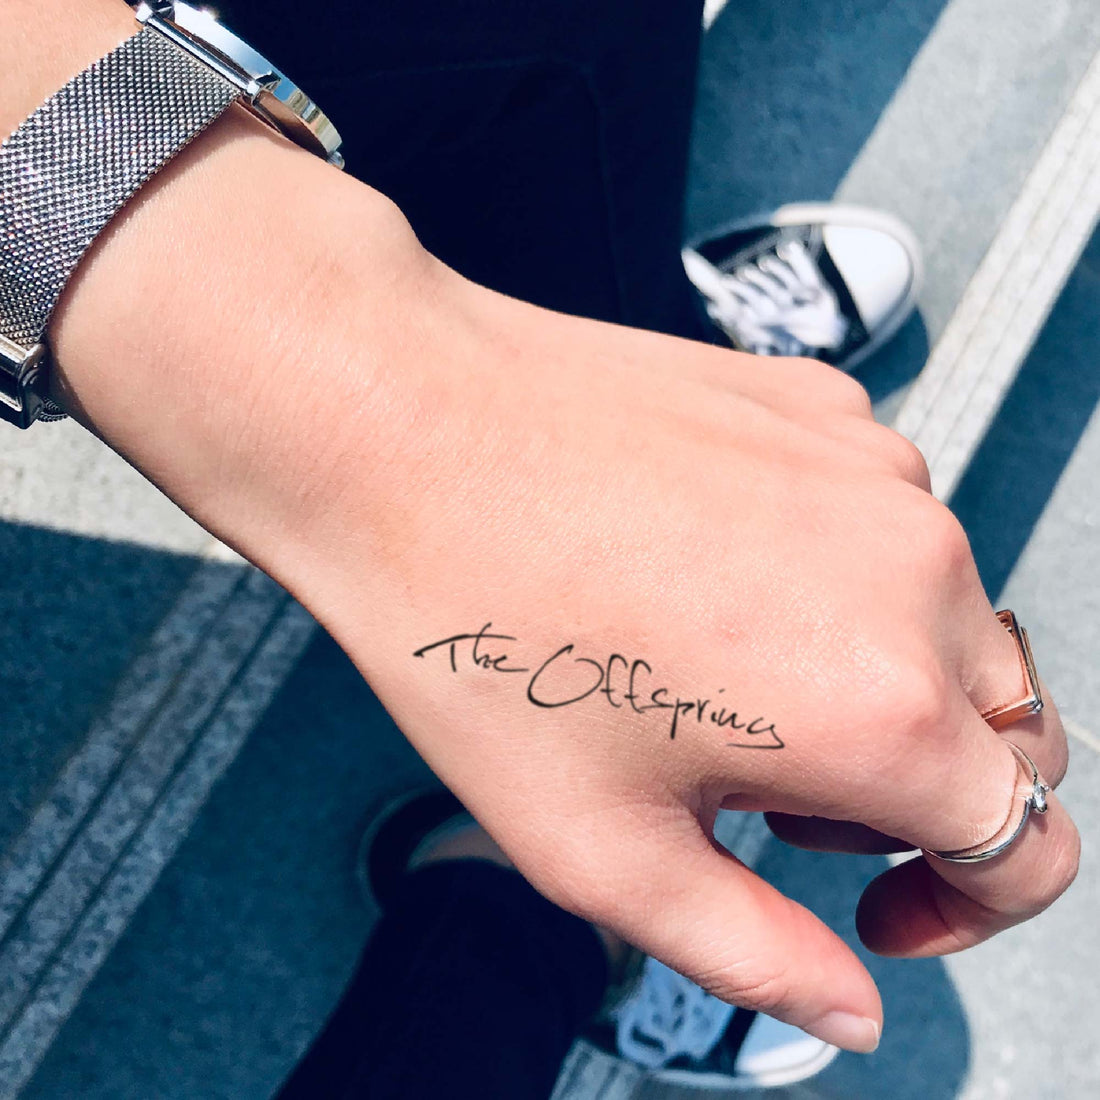 The Offspring custom temporary tattoo sticker design idea inspiration meanings removal arm wrist hand words font name signature calligraphy lyrics tour concert outfits merch accessory gift souvenir costumes wear dress up code